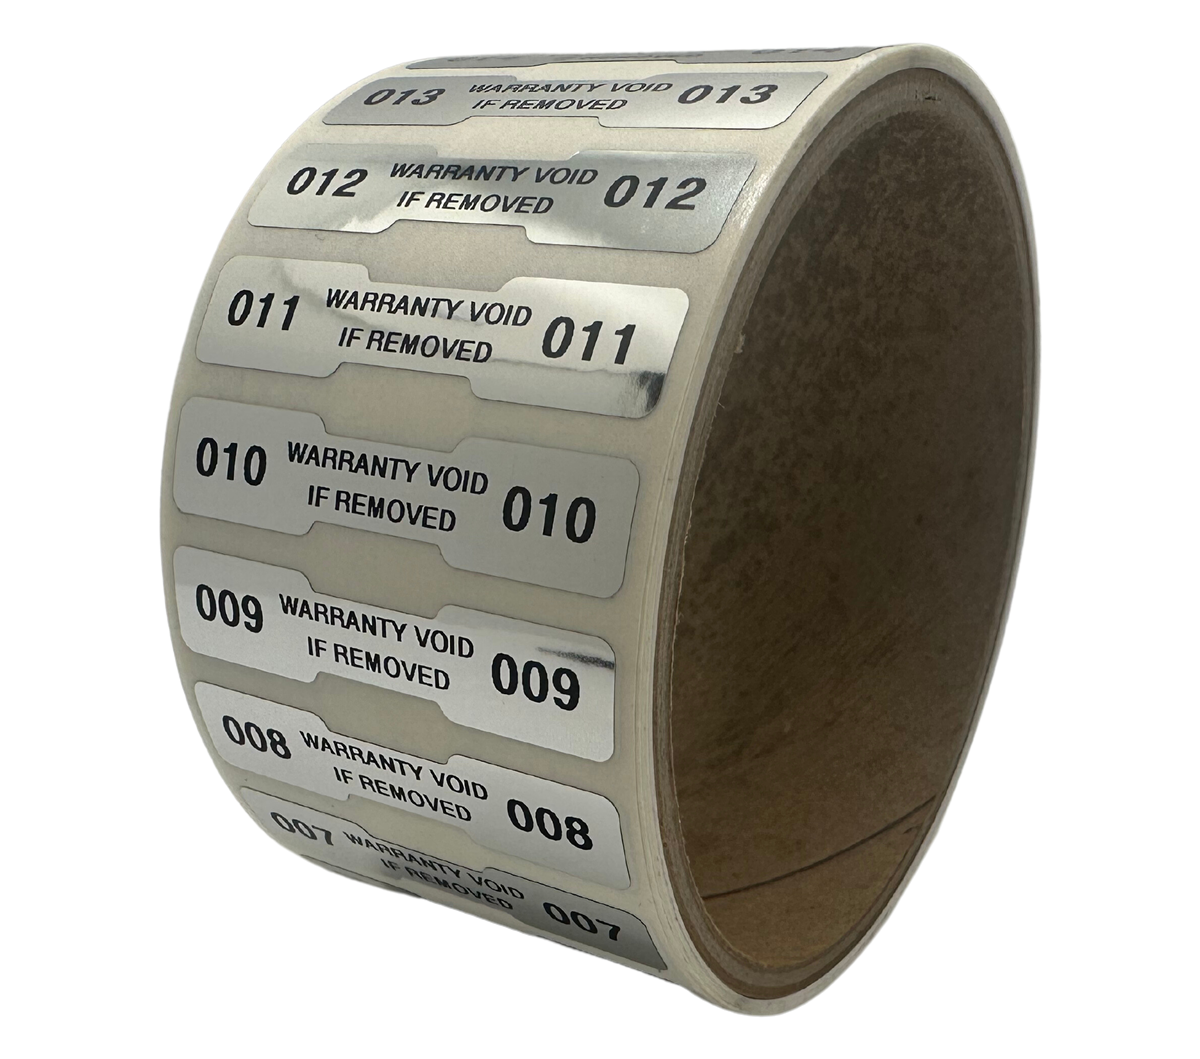 2,000 Finish Tamper Evident Metallic Silver / Chrome Non Residue Security Labels TamperGuard® Seal Sticker, Dogbone 1.75" x 0.375" (44mm x 9mm). Printed: Warranty Void if Removed + Serialized